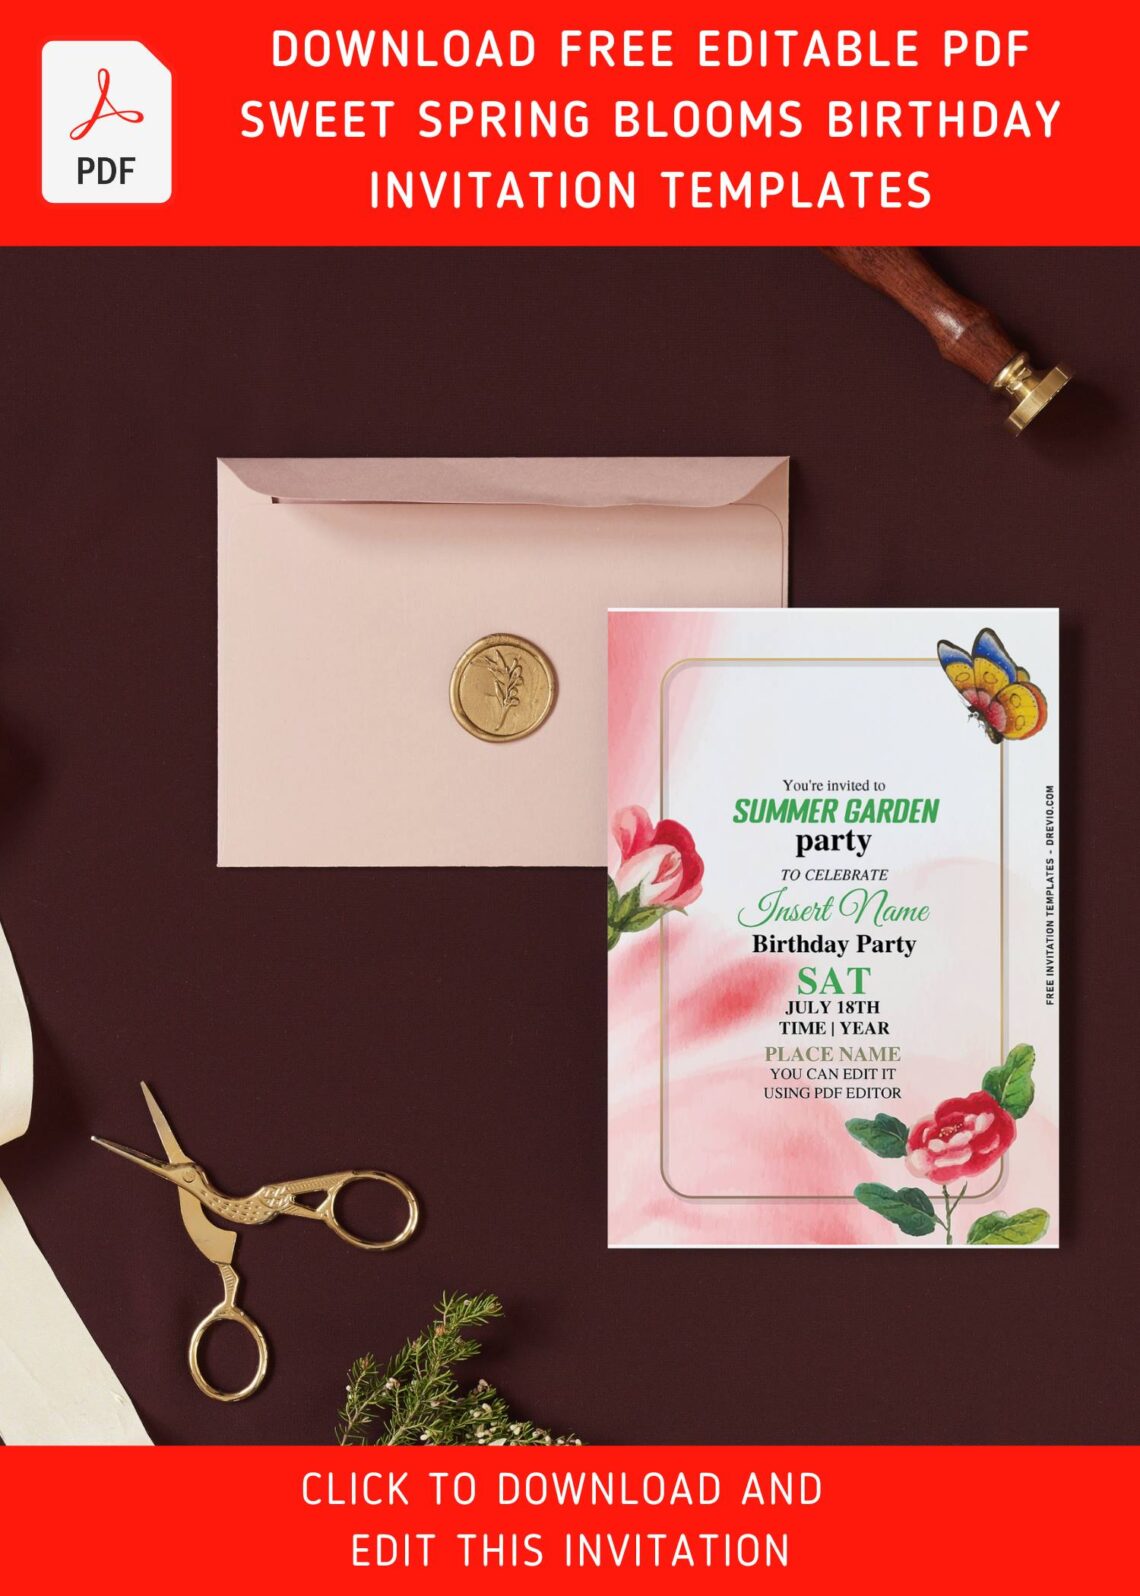 (Free Editable PDF) Sweet Spring Blooms Birthday Soiree Invitation Templates with gorgeous peonies